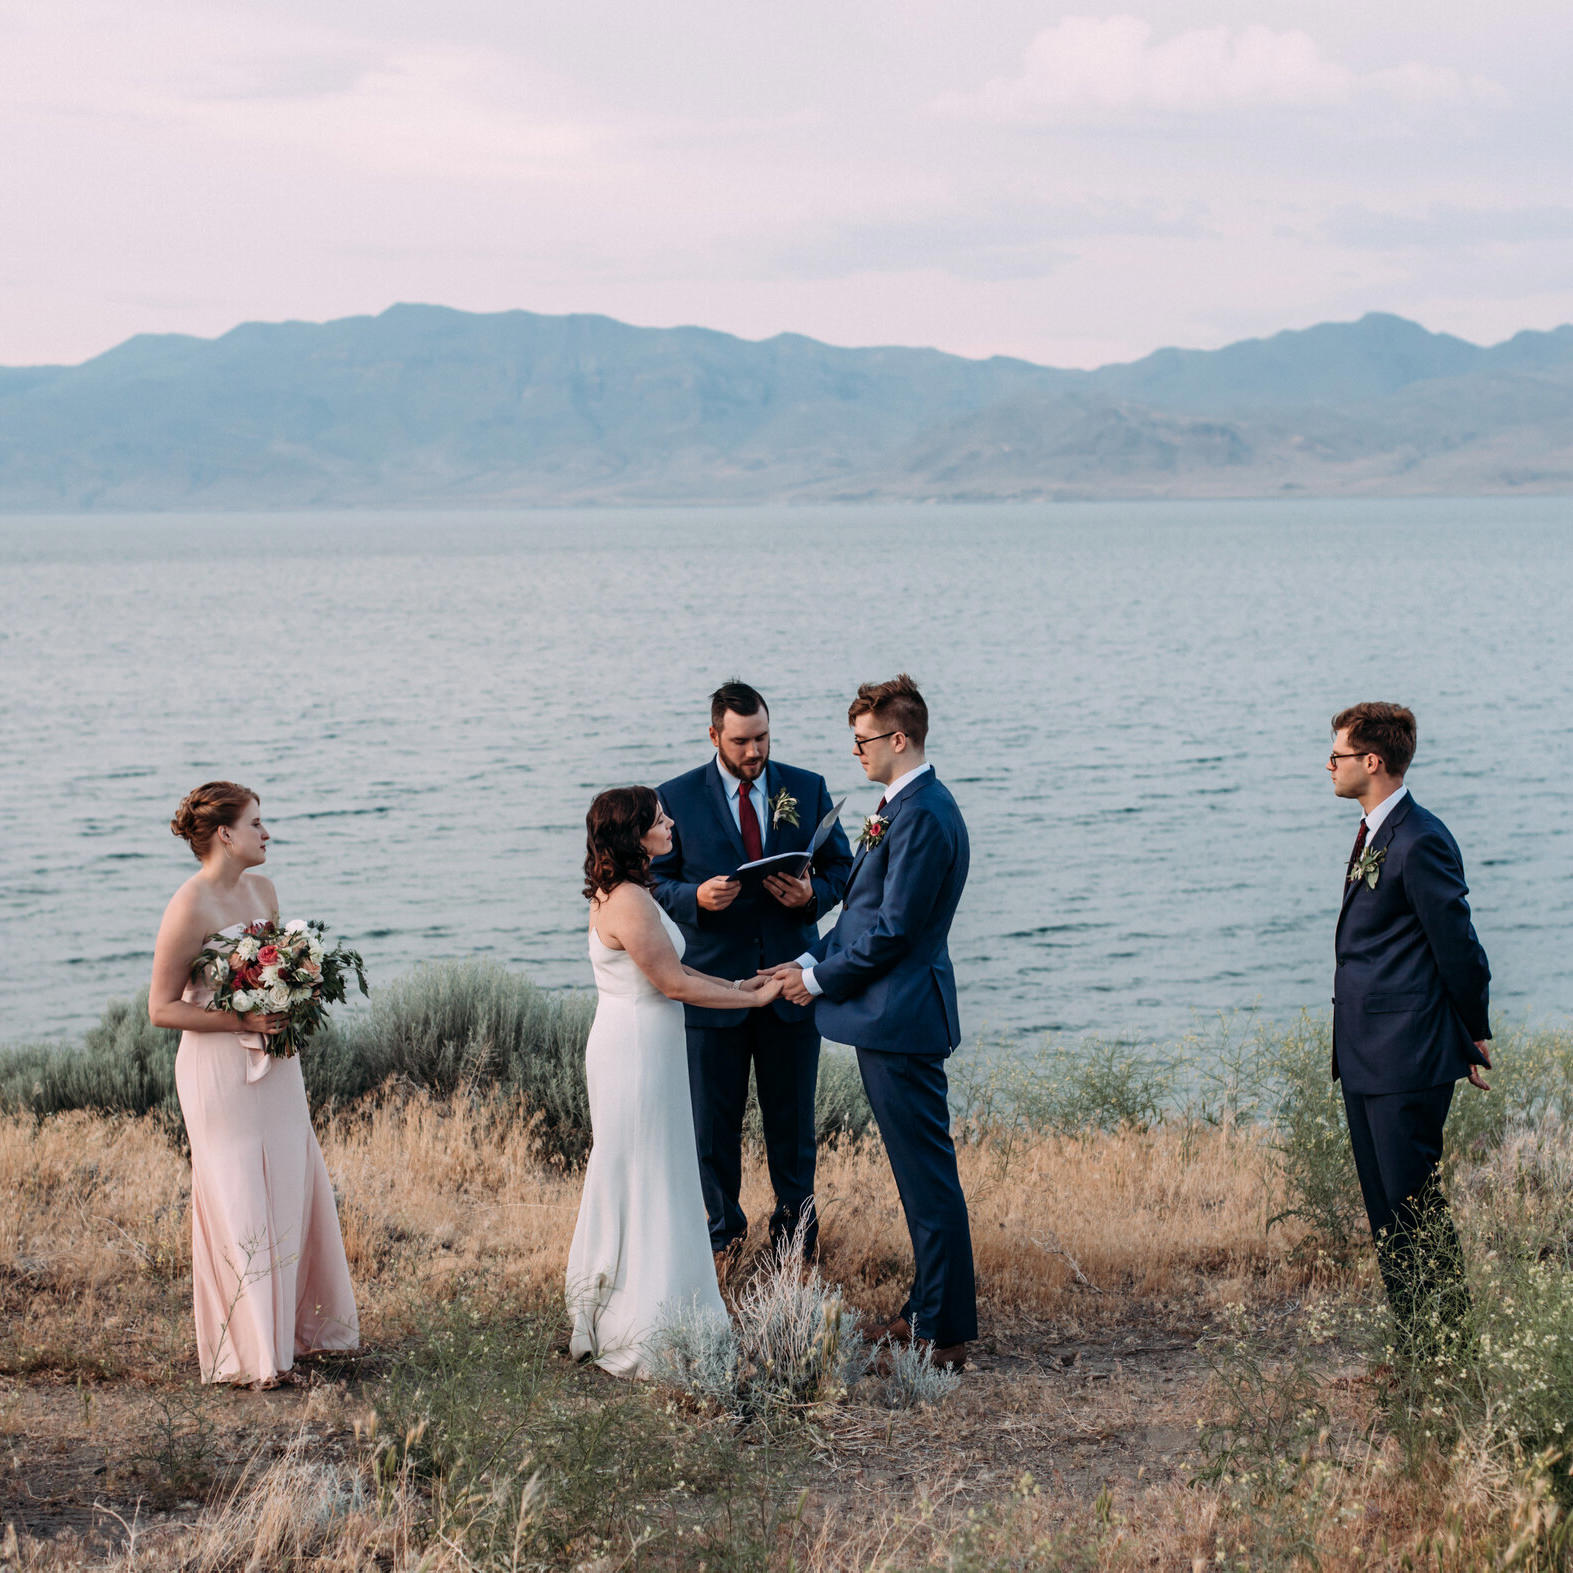 couple getting married outdoors by lake